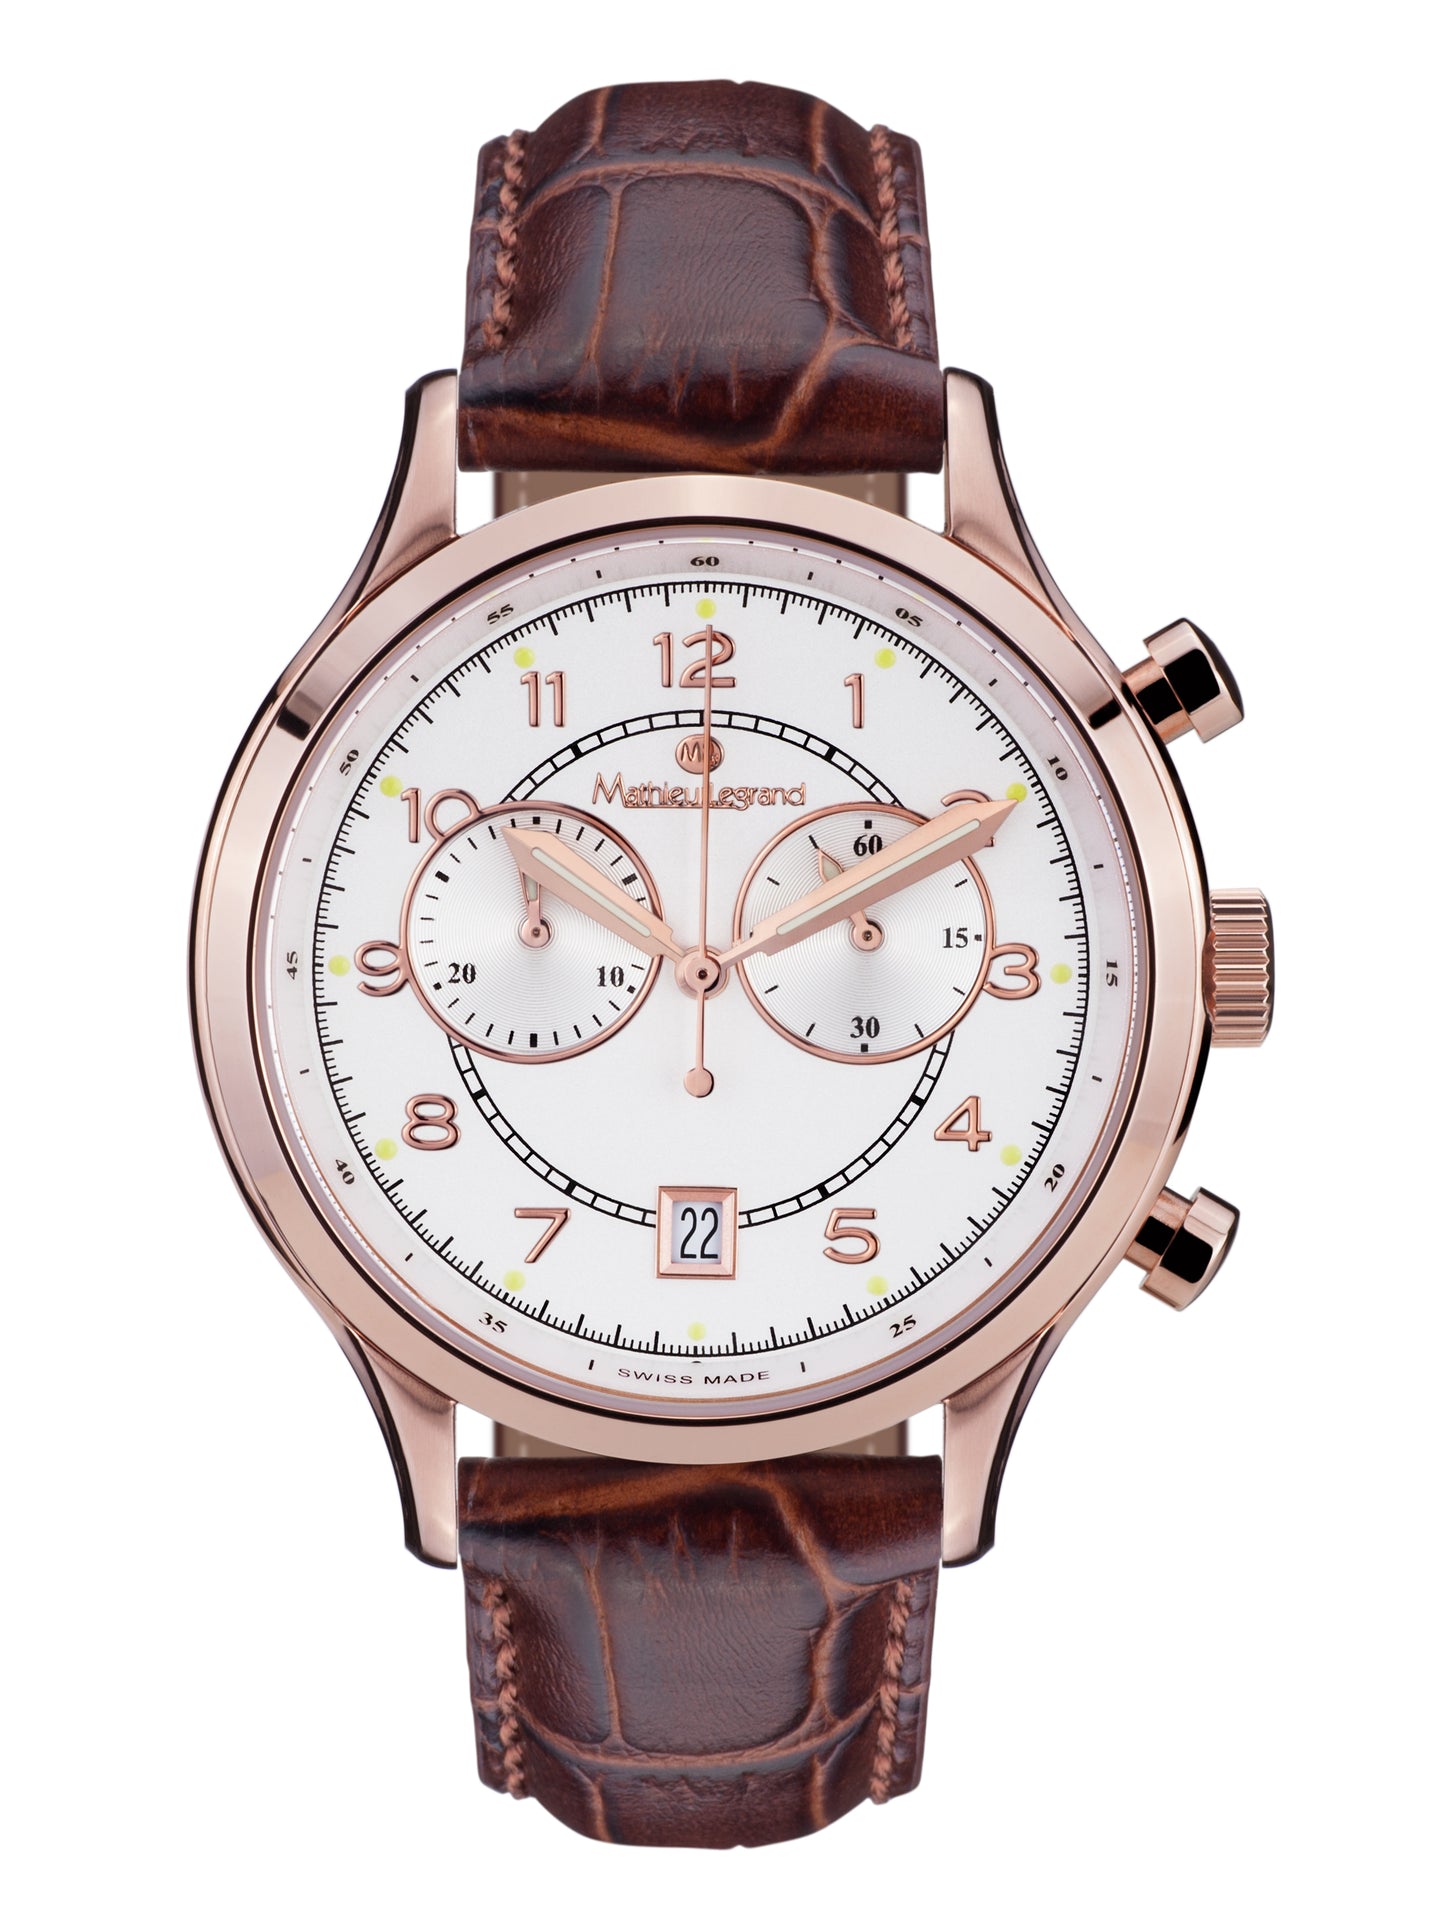 Automatic watches — Orbite Polaire — Mathieu Legrand — rosegold IP silver leather